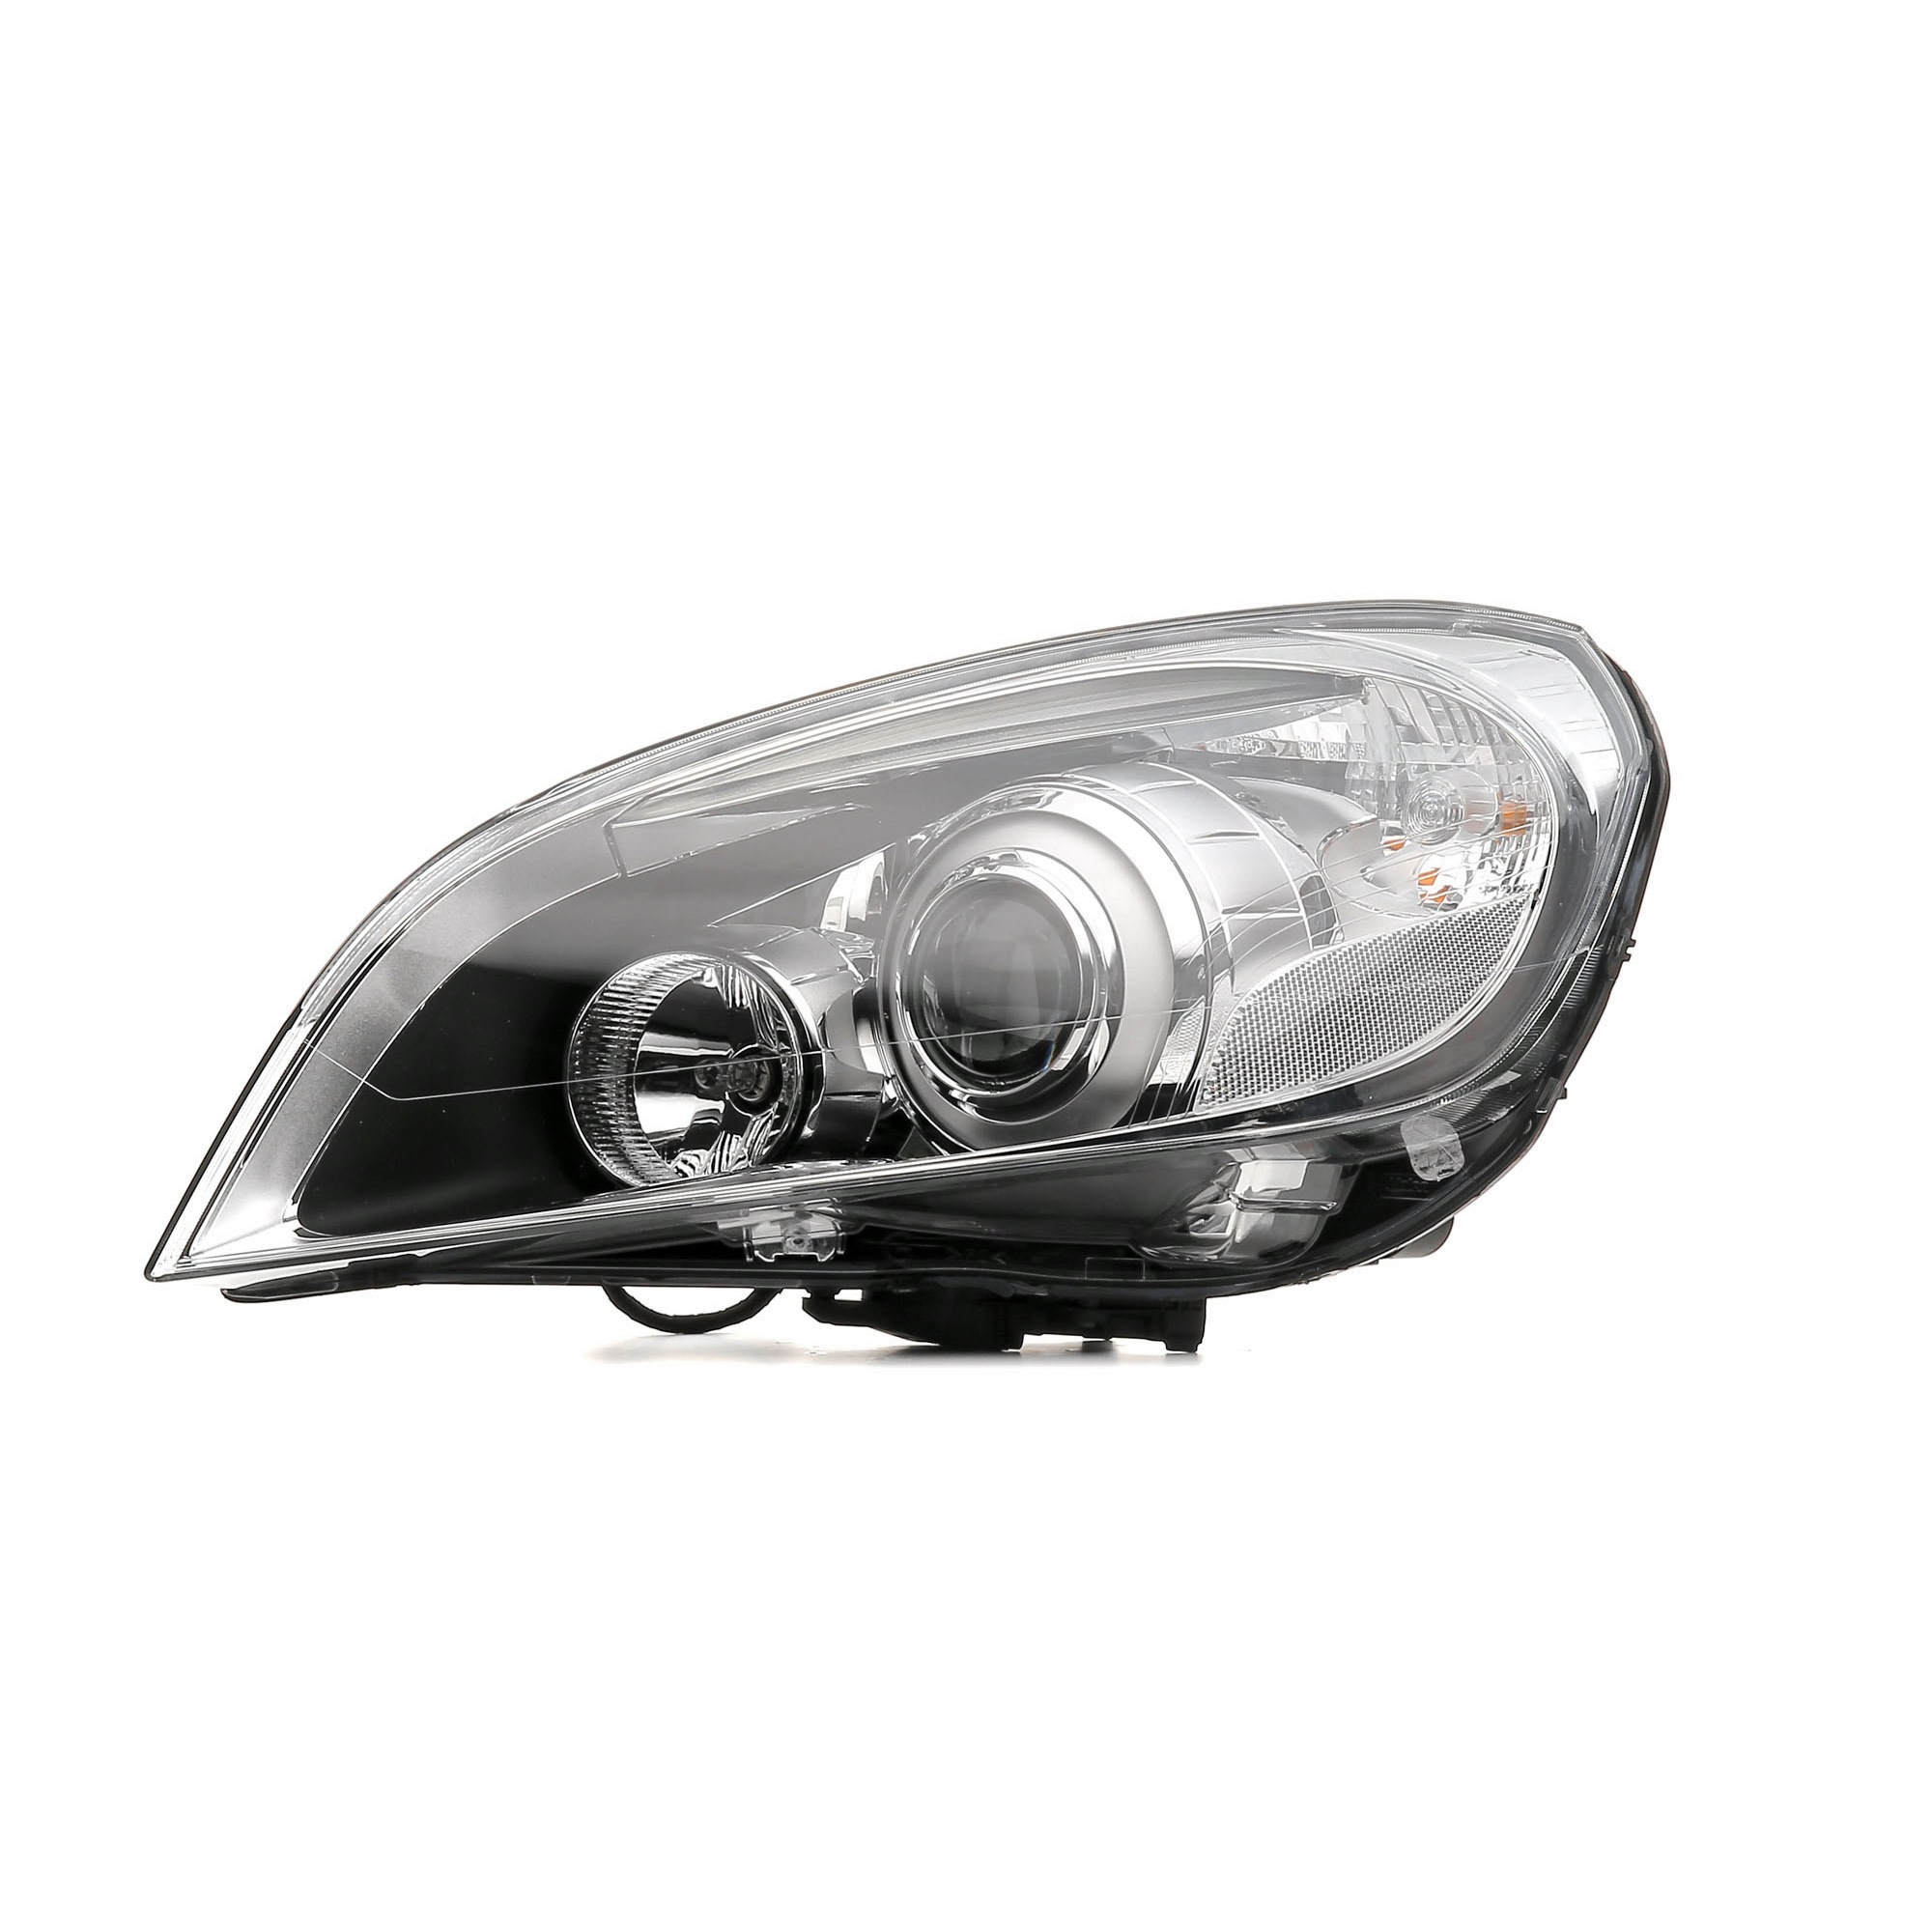 VALEO ORIGINAL PART 046956 Headlight Left, with dynamic bending light, for right-hand traffic, without control unit for Xenon